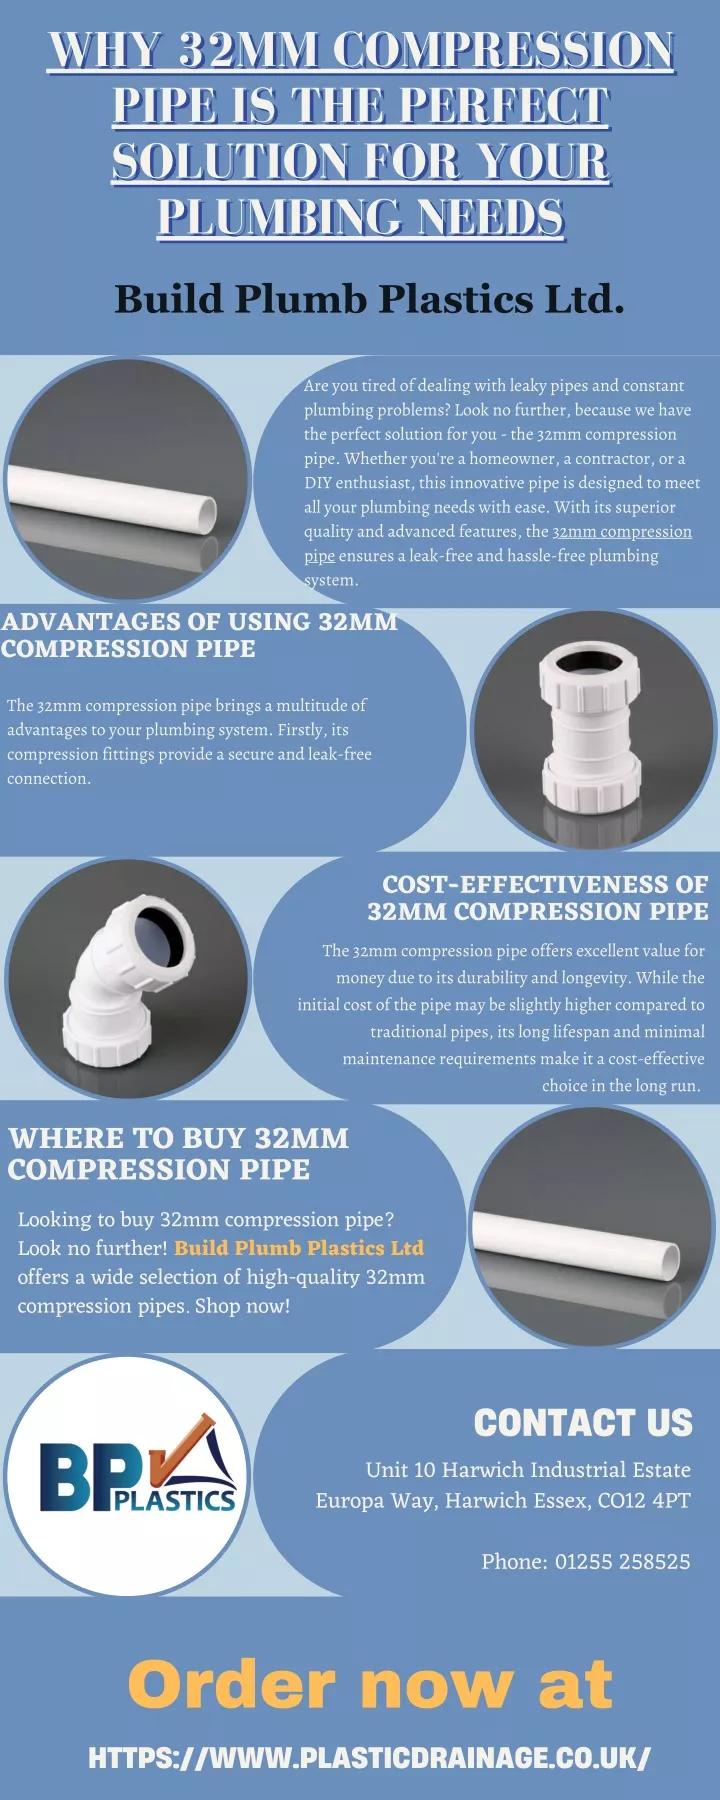 why 32mm compression why 32mm compression pipe